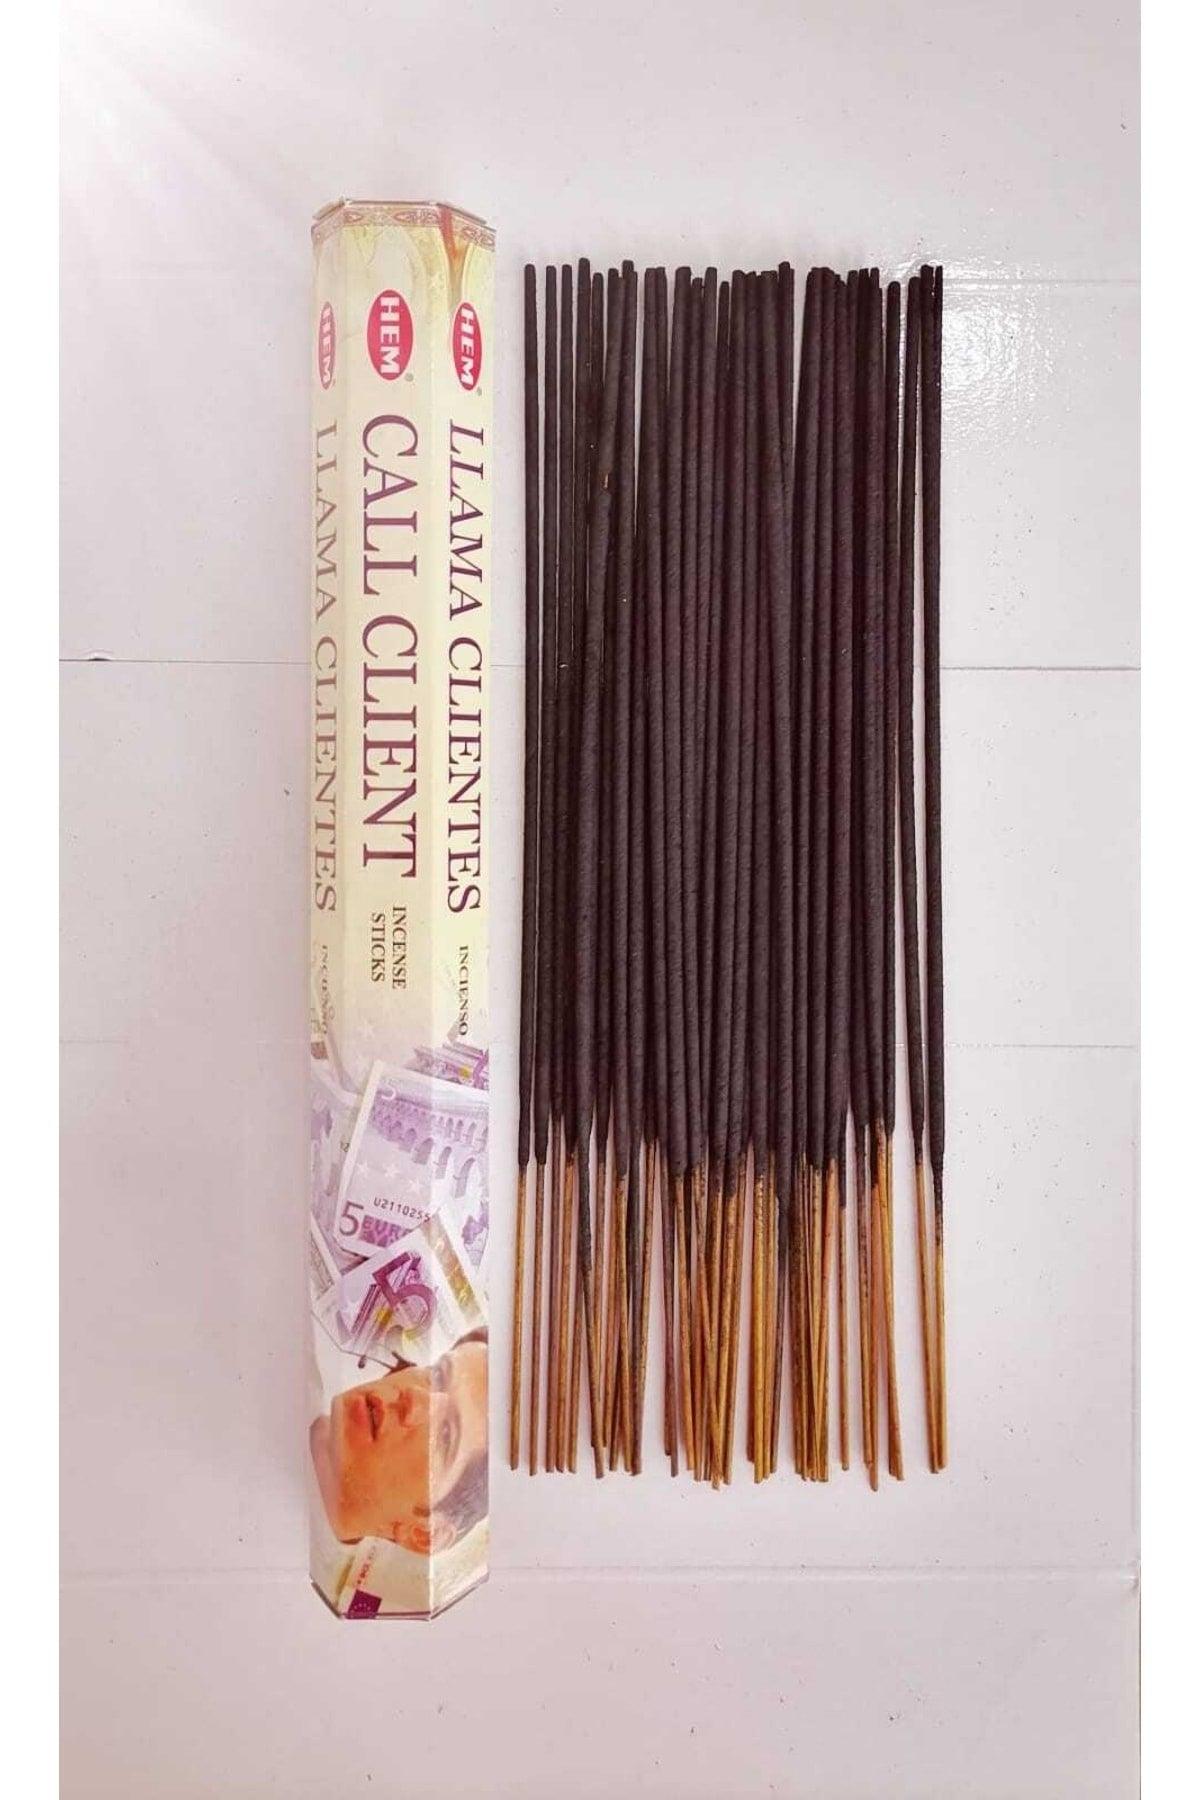 1 Box Stick Incense With Scented Money Calling 20 pcs - Swordslife